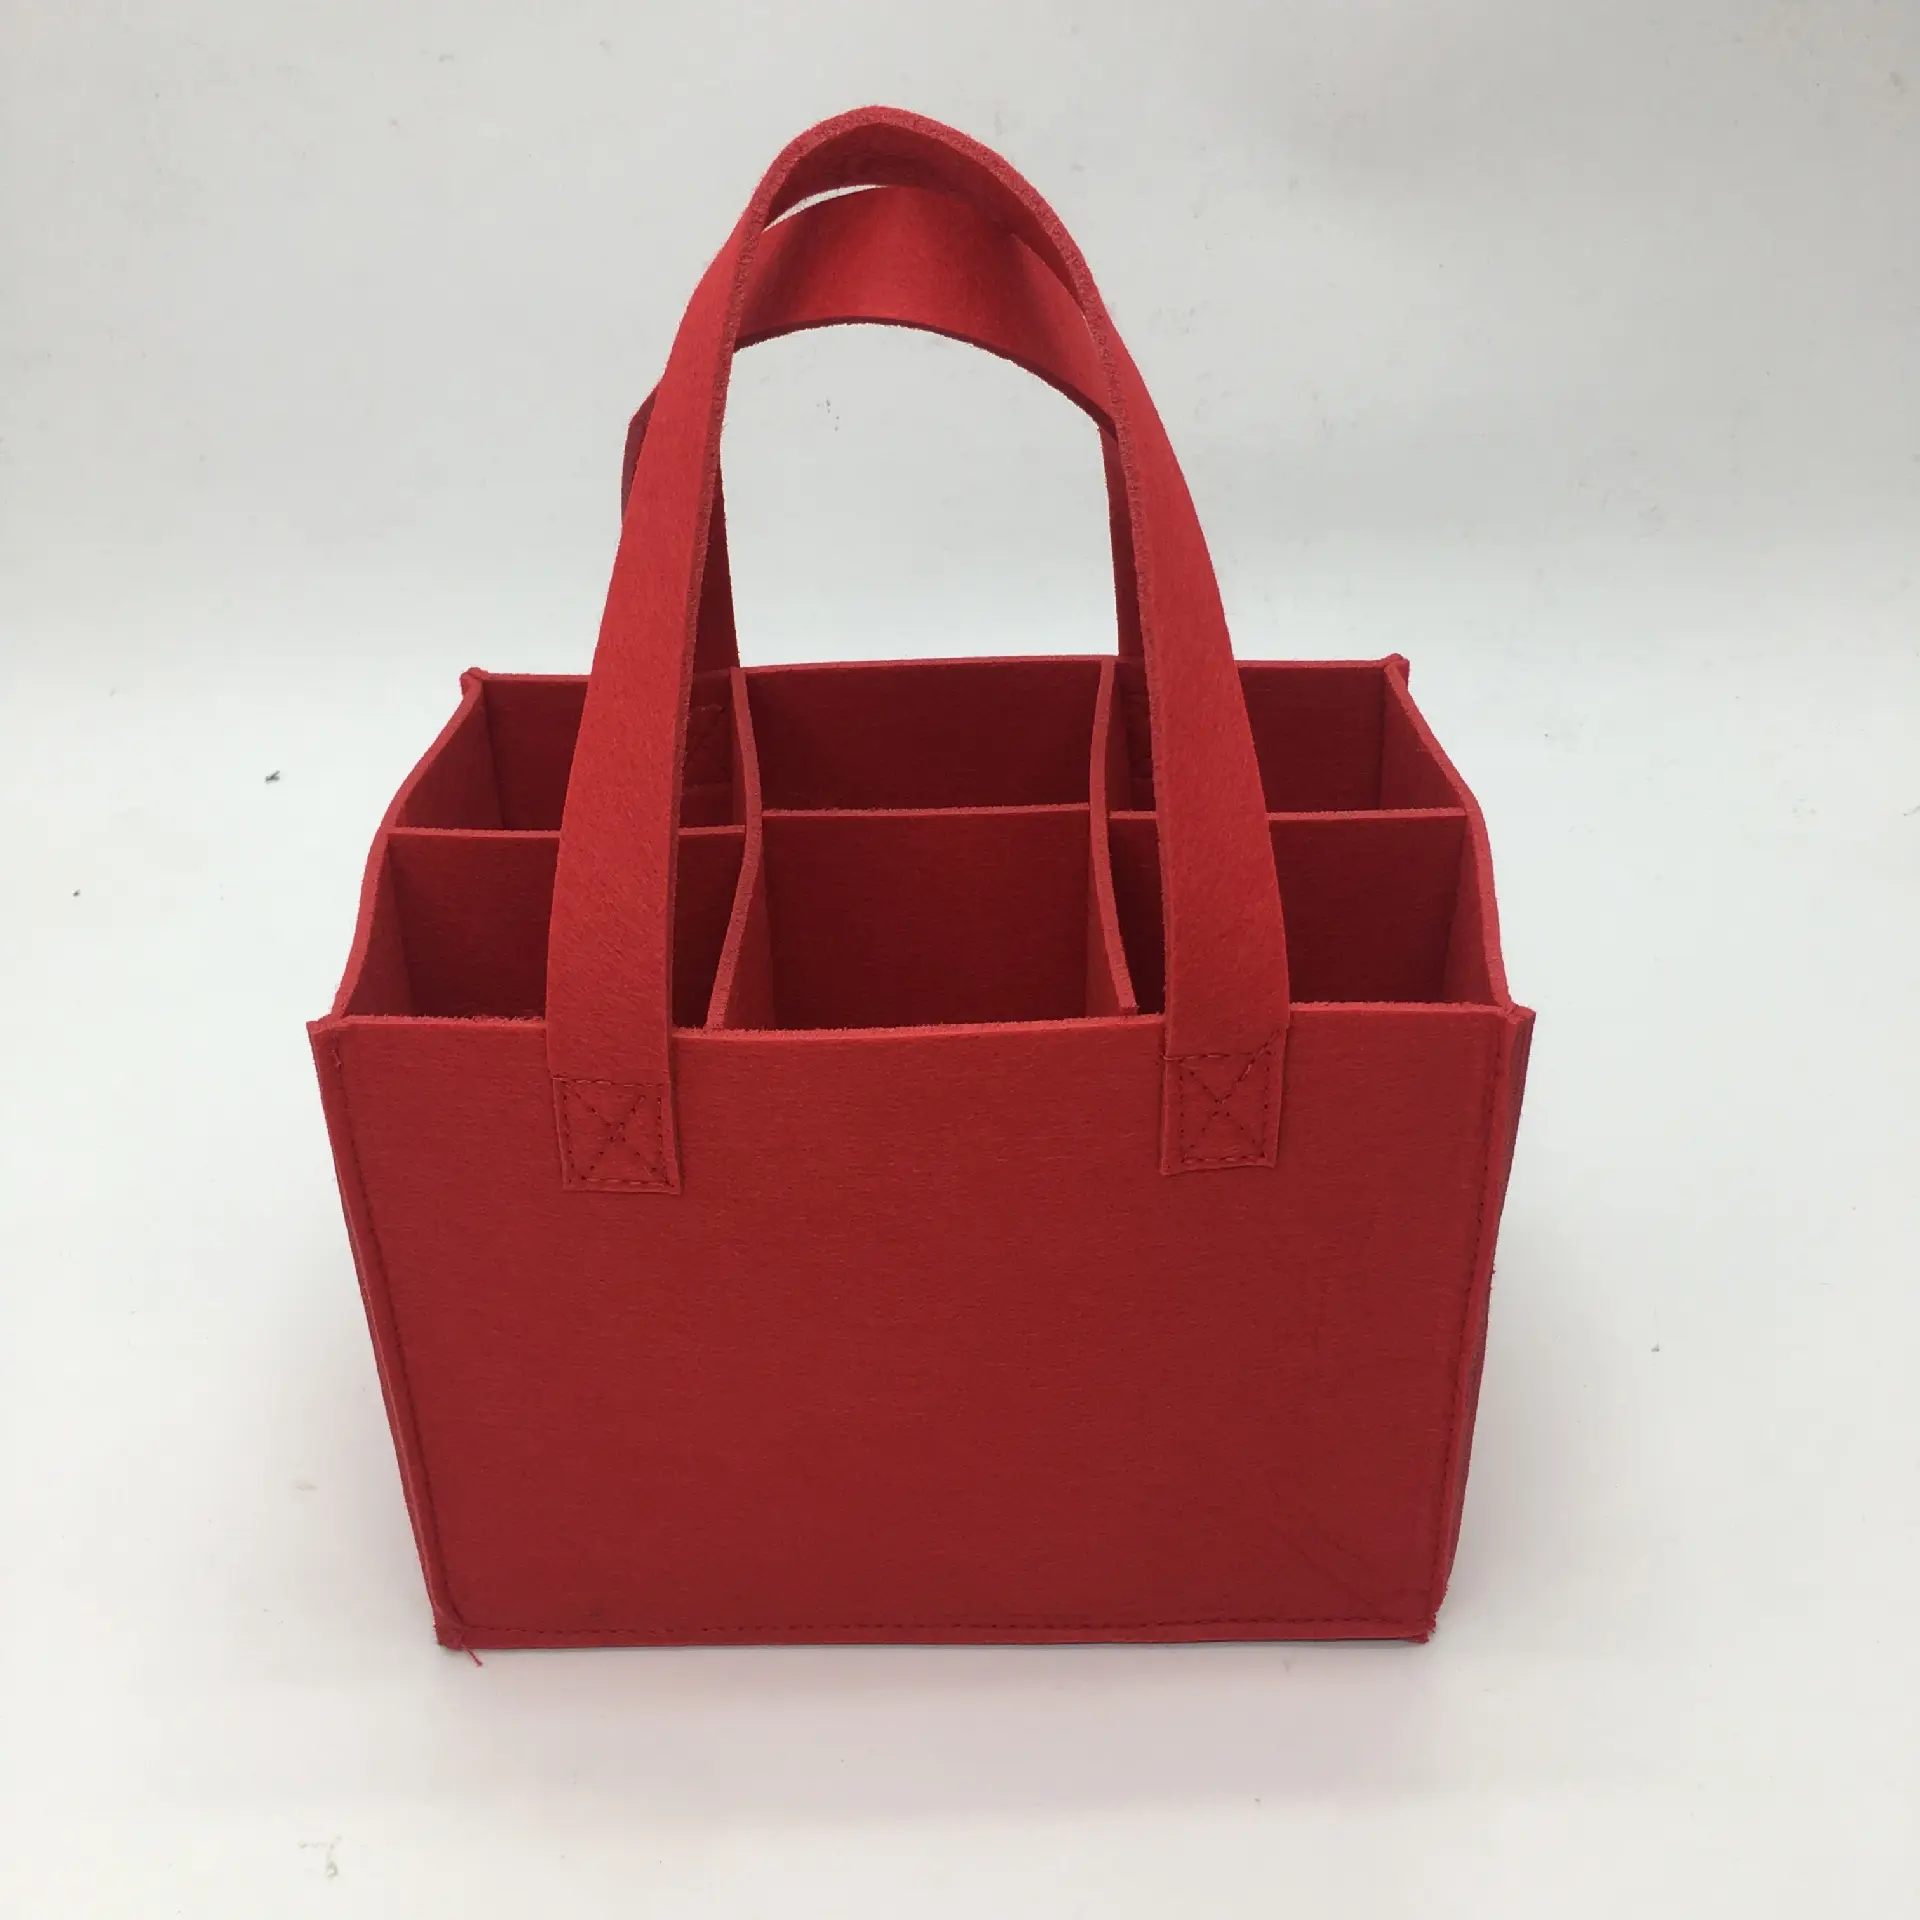 Felt wine bag compartment red wine tote bag Portable solid anti-collision protection wine bag